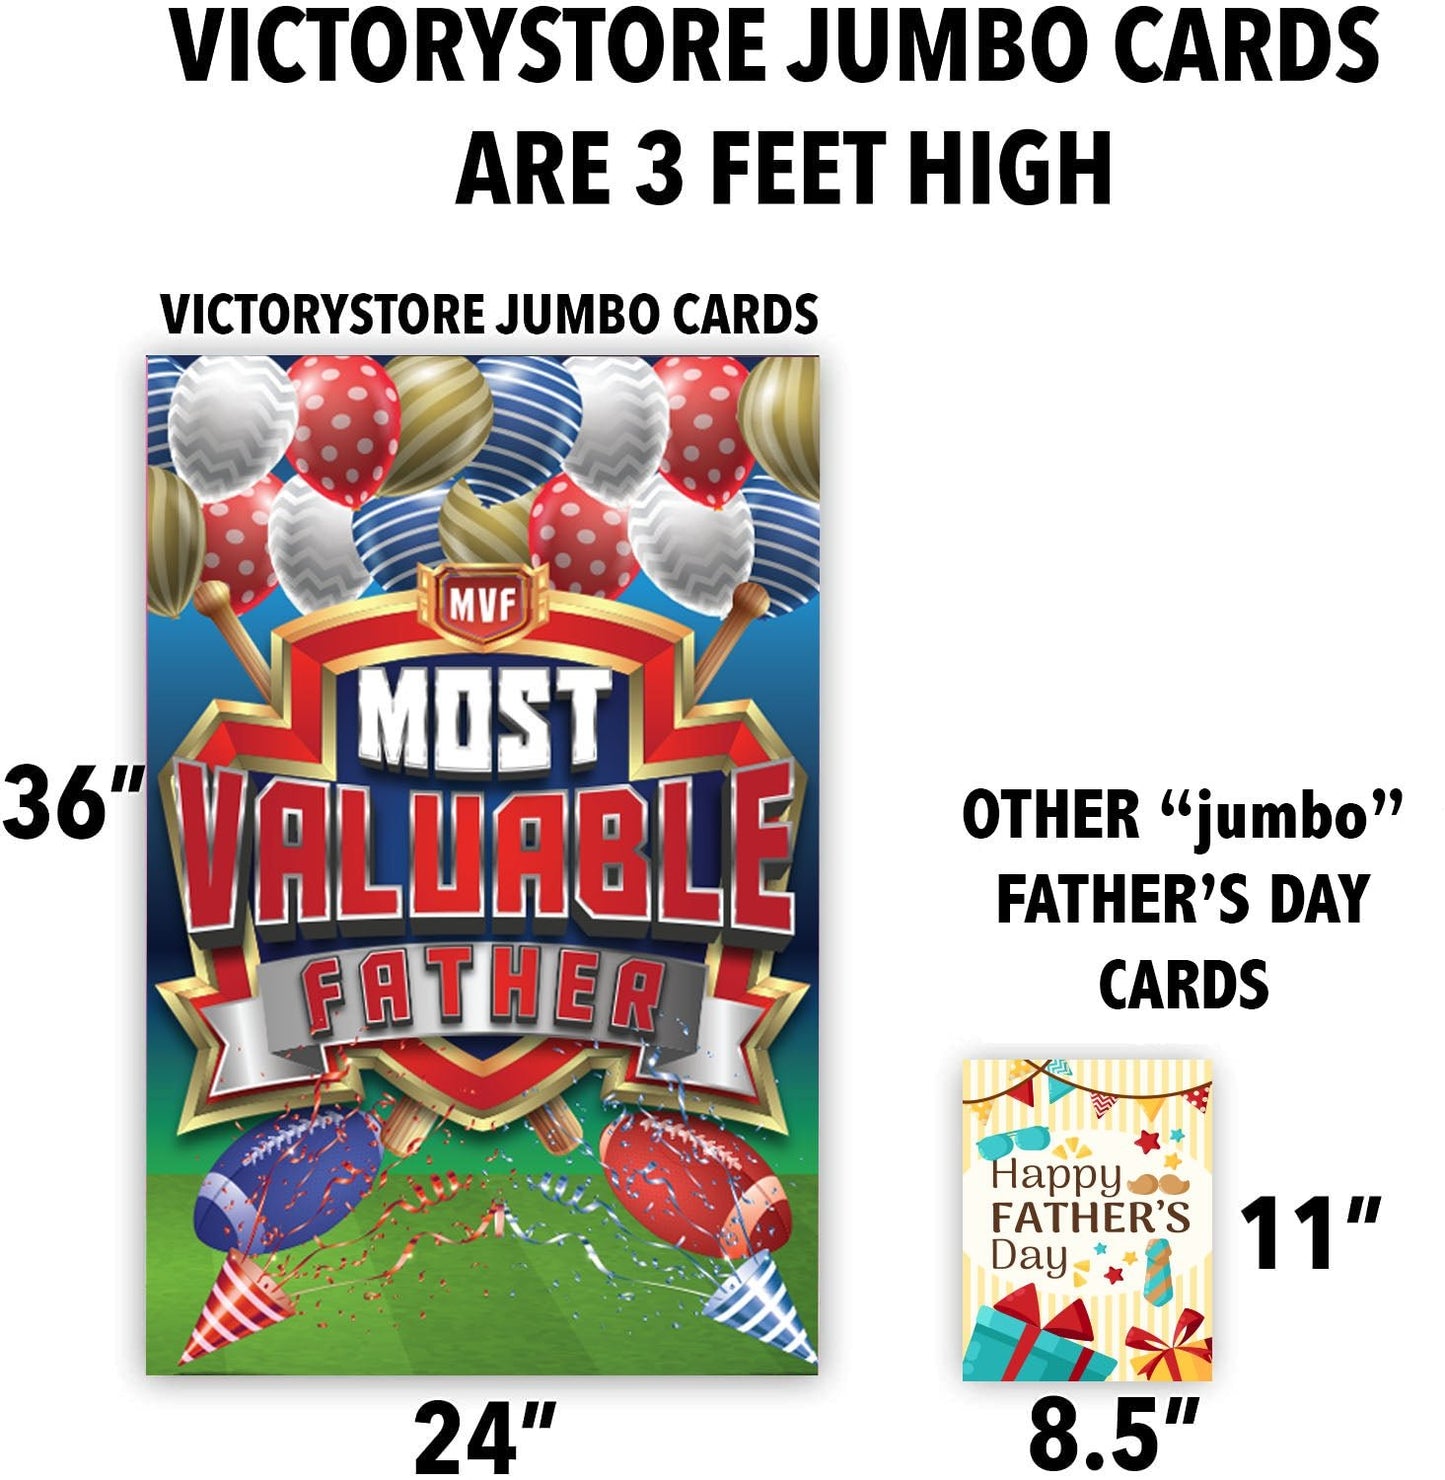 Giant Custom Most Valuable Father Greeting Card